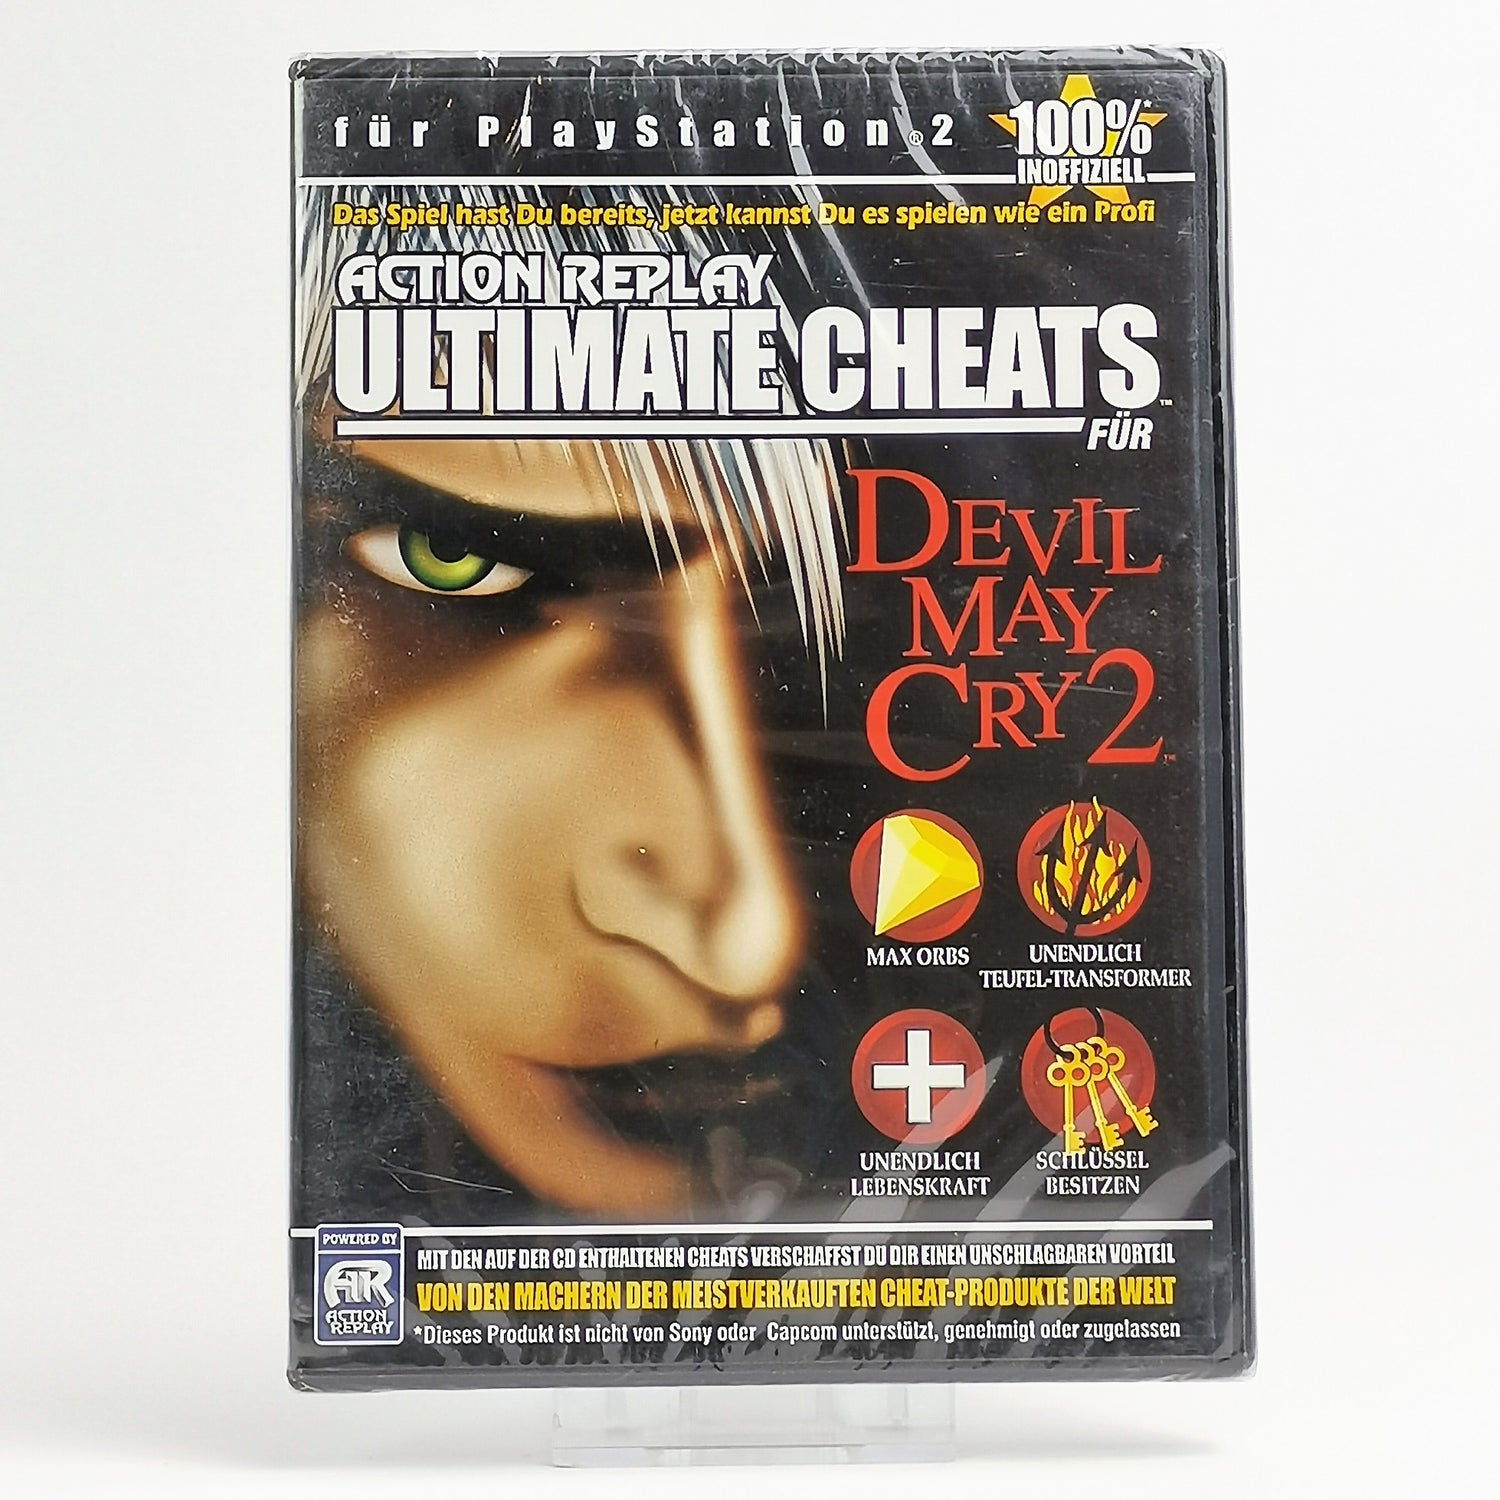 Sony Playstation 2 : Action Replay Ultimate Cheats - Devil May Cry 2 | PS2 NEU